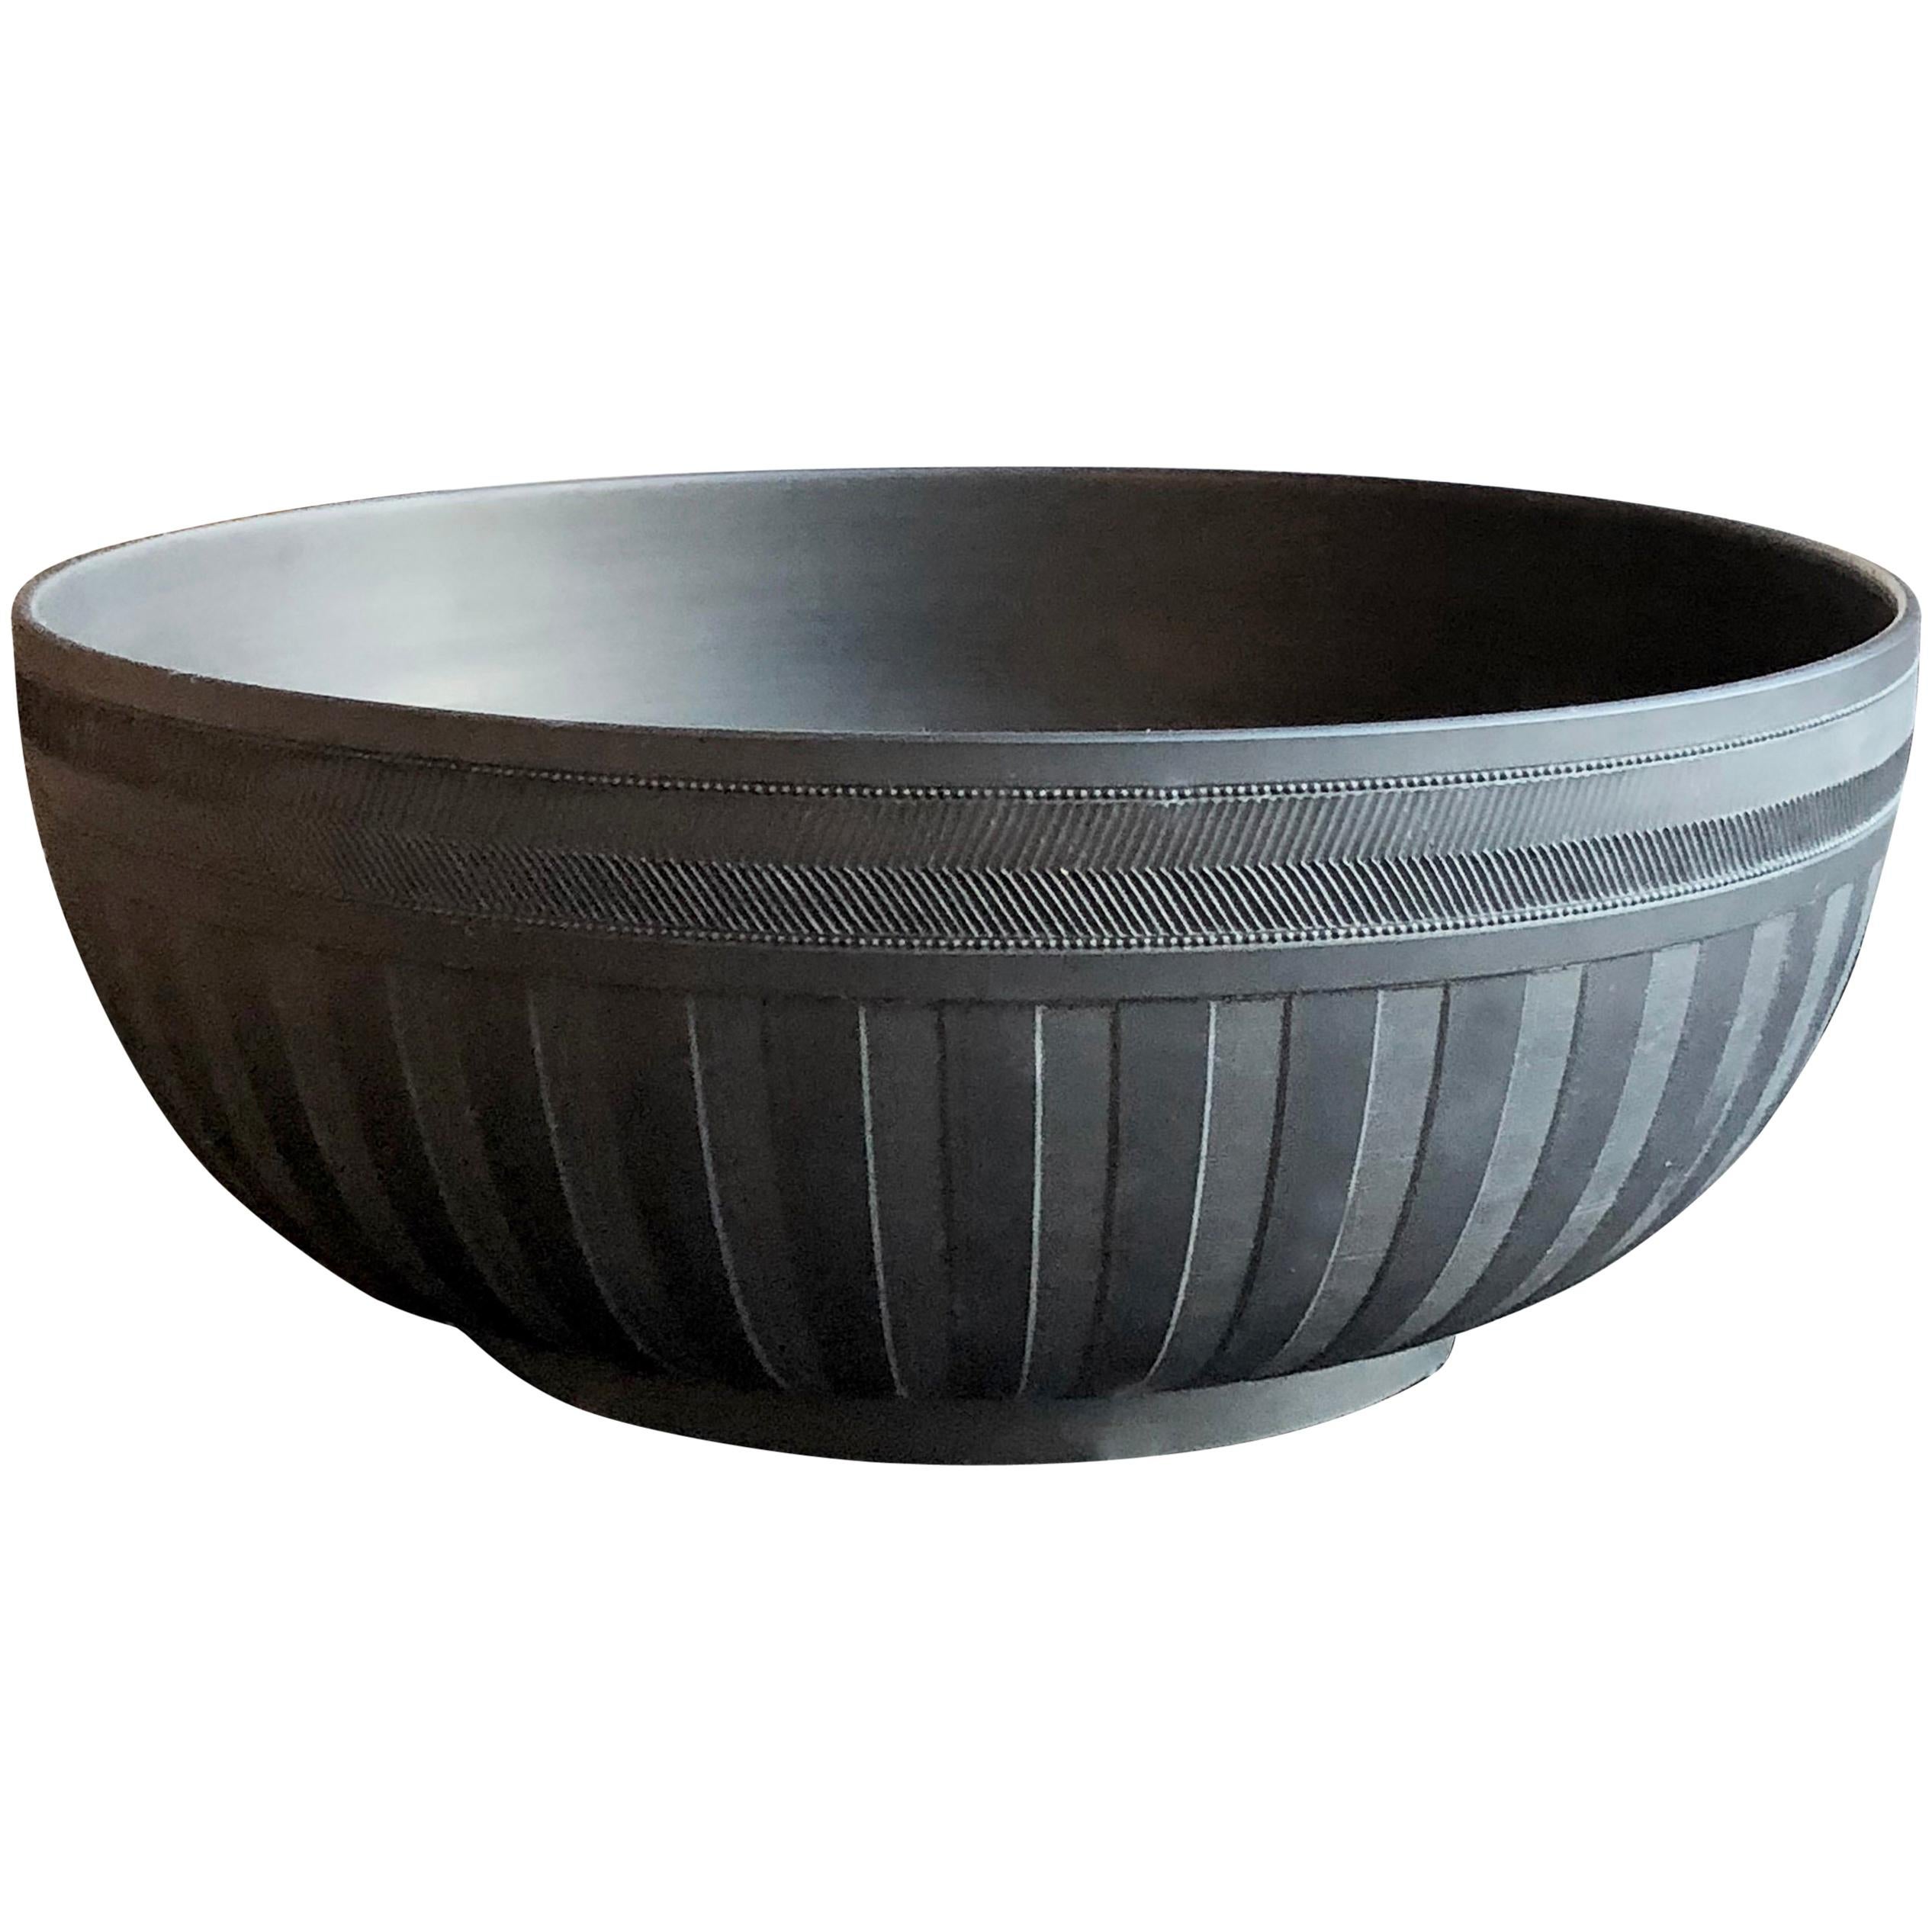 Basalt Striped Bowl by Wedgwood from 1930s For Sale